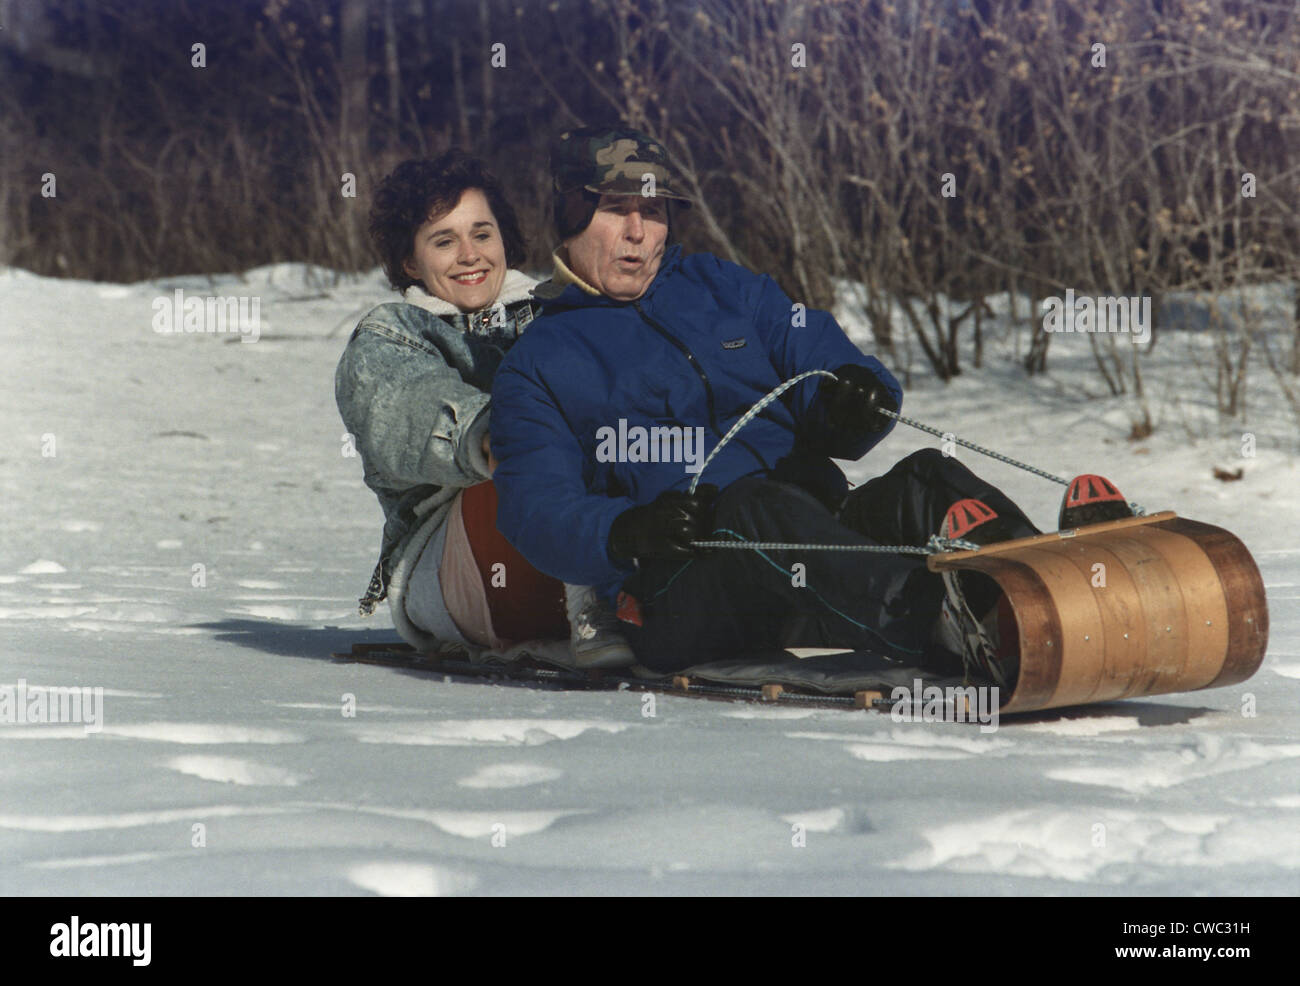 President George Bush goes sledding at Camp David with his daughter Doro. Jan. 13 1991. (BSLOC 2011 3 67) Stock Photo